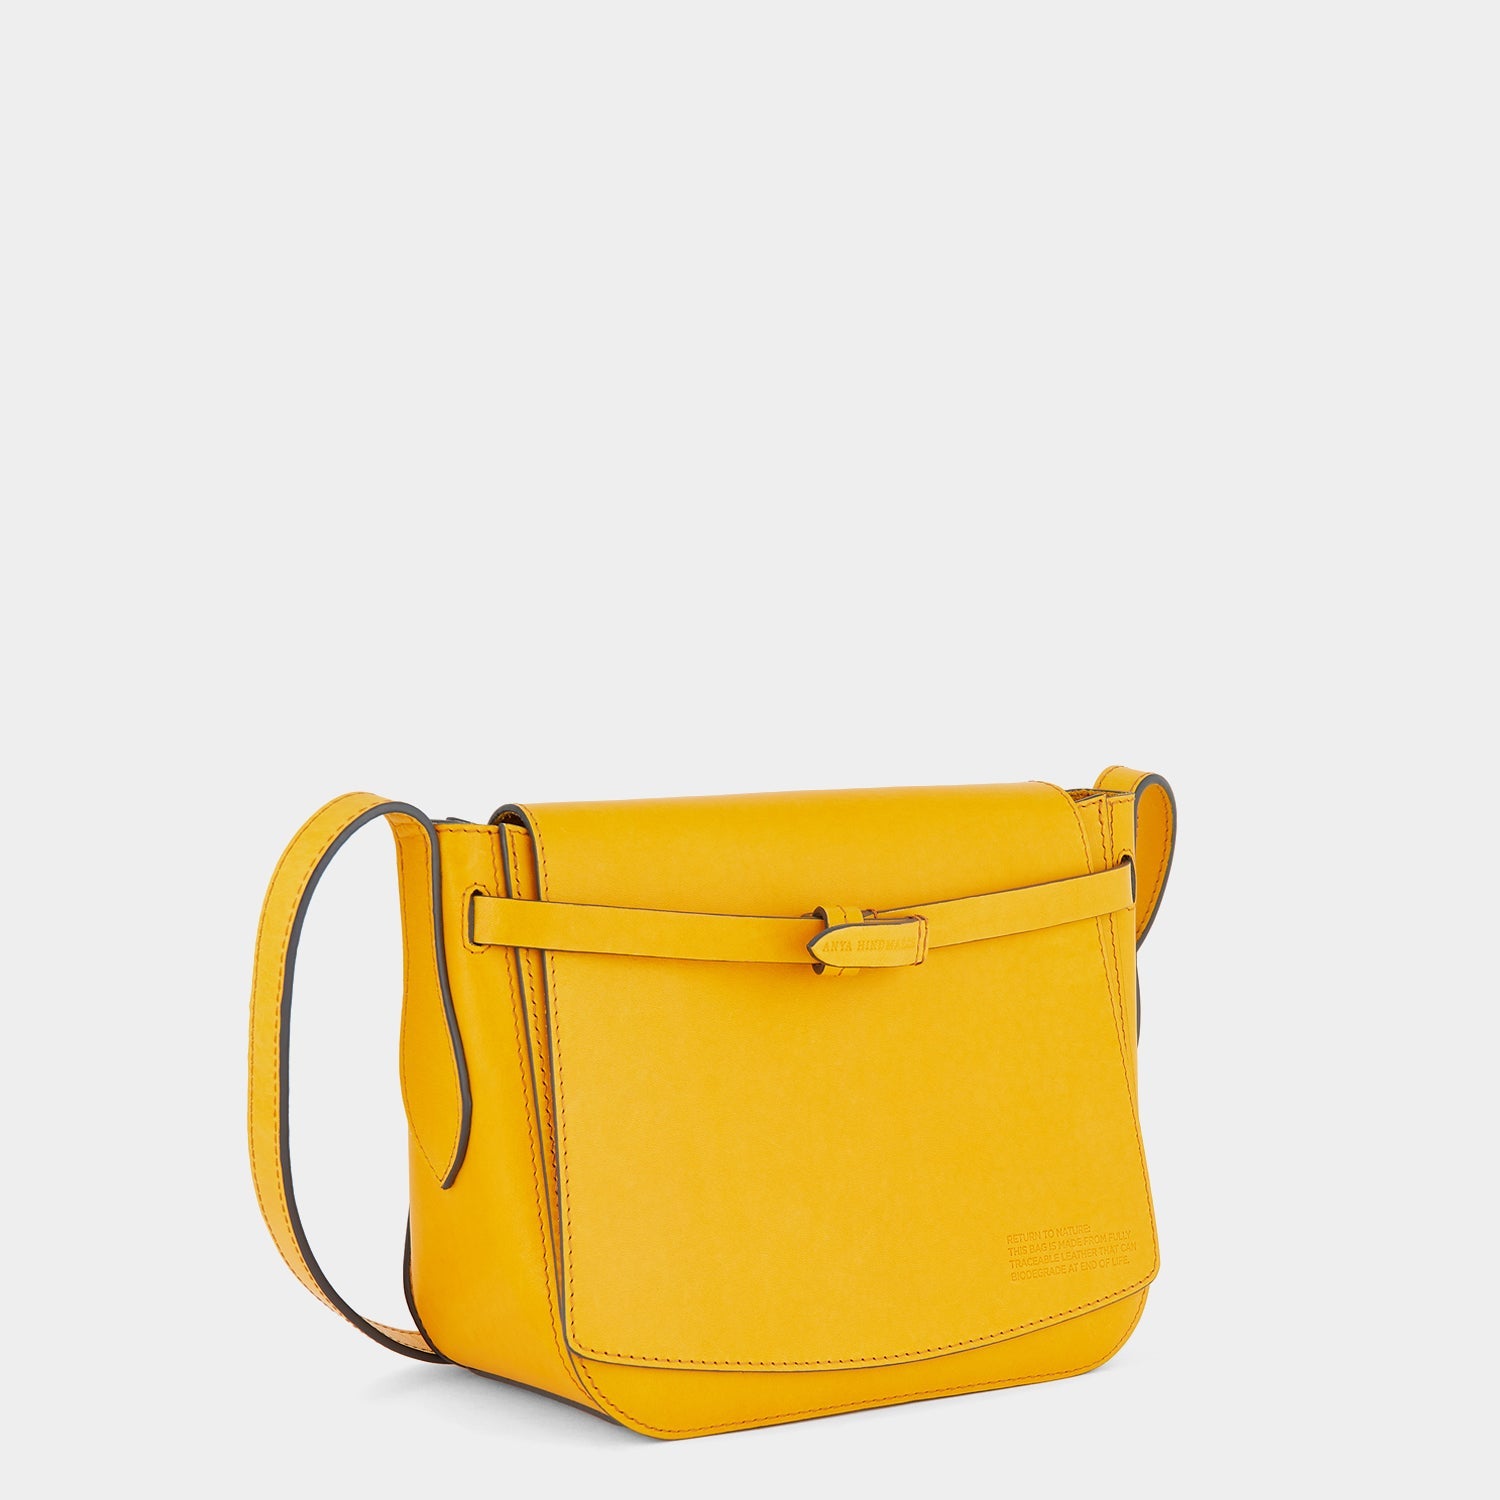 Return to Nature Cross-body -

                  
                    Compostable Leather in Honey -
                  

                  Anya Hindmarch EU
